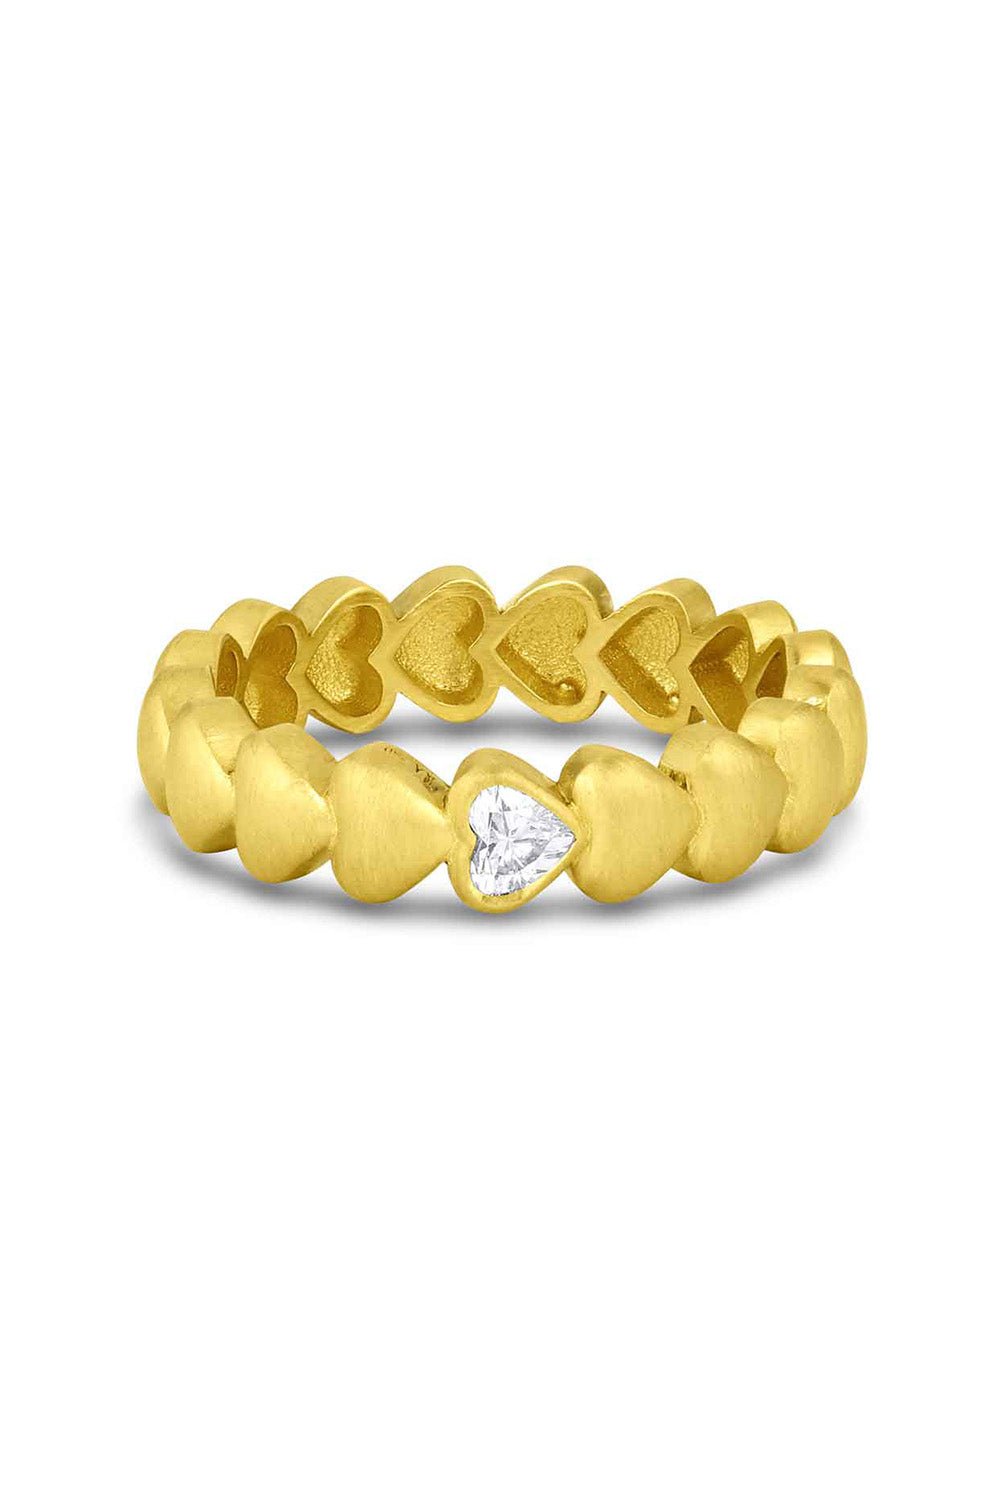 LEIGH MAXWELL-Heart Eternity Band-YELLOW GOLD